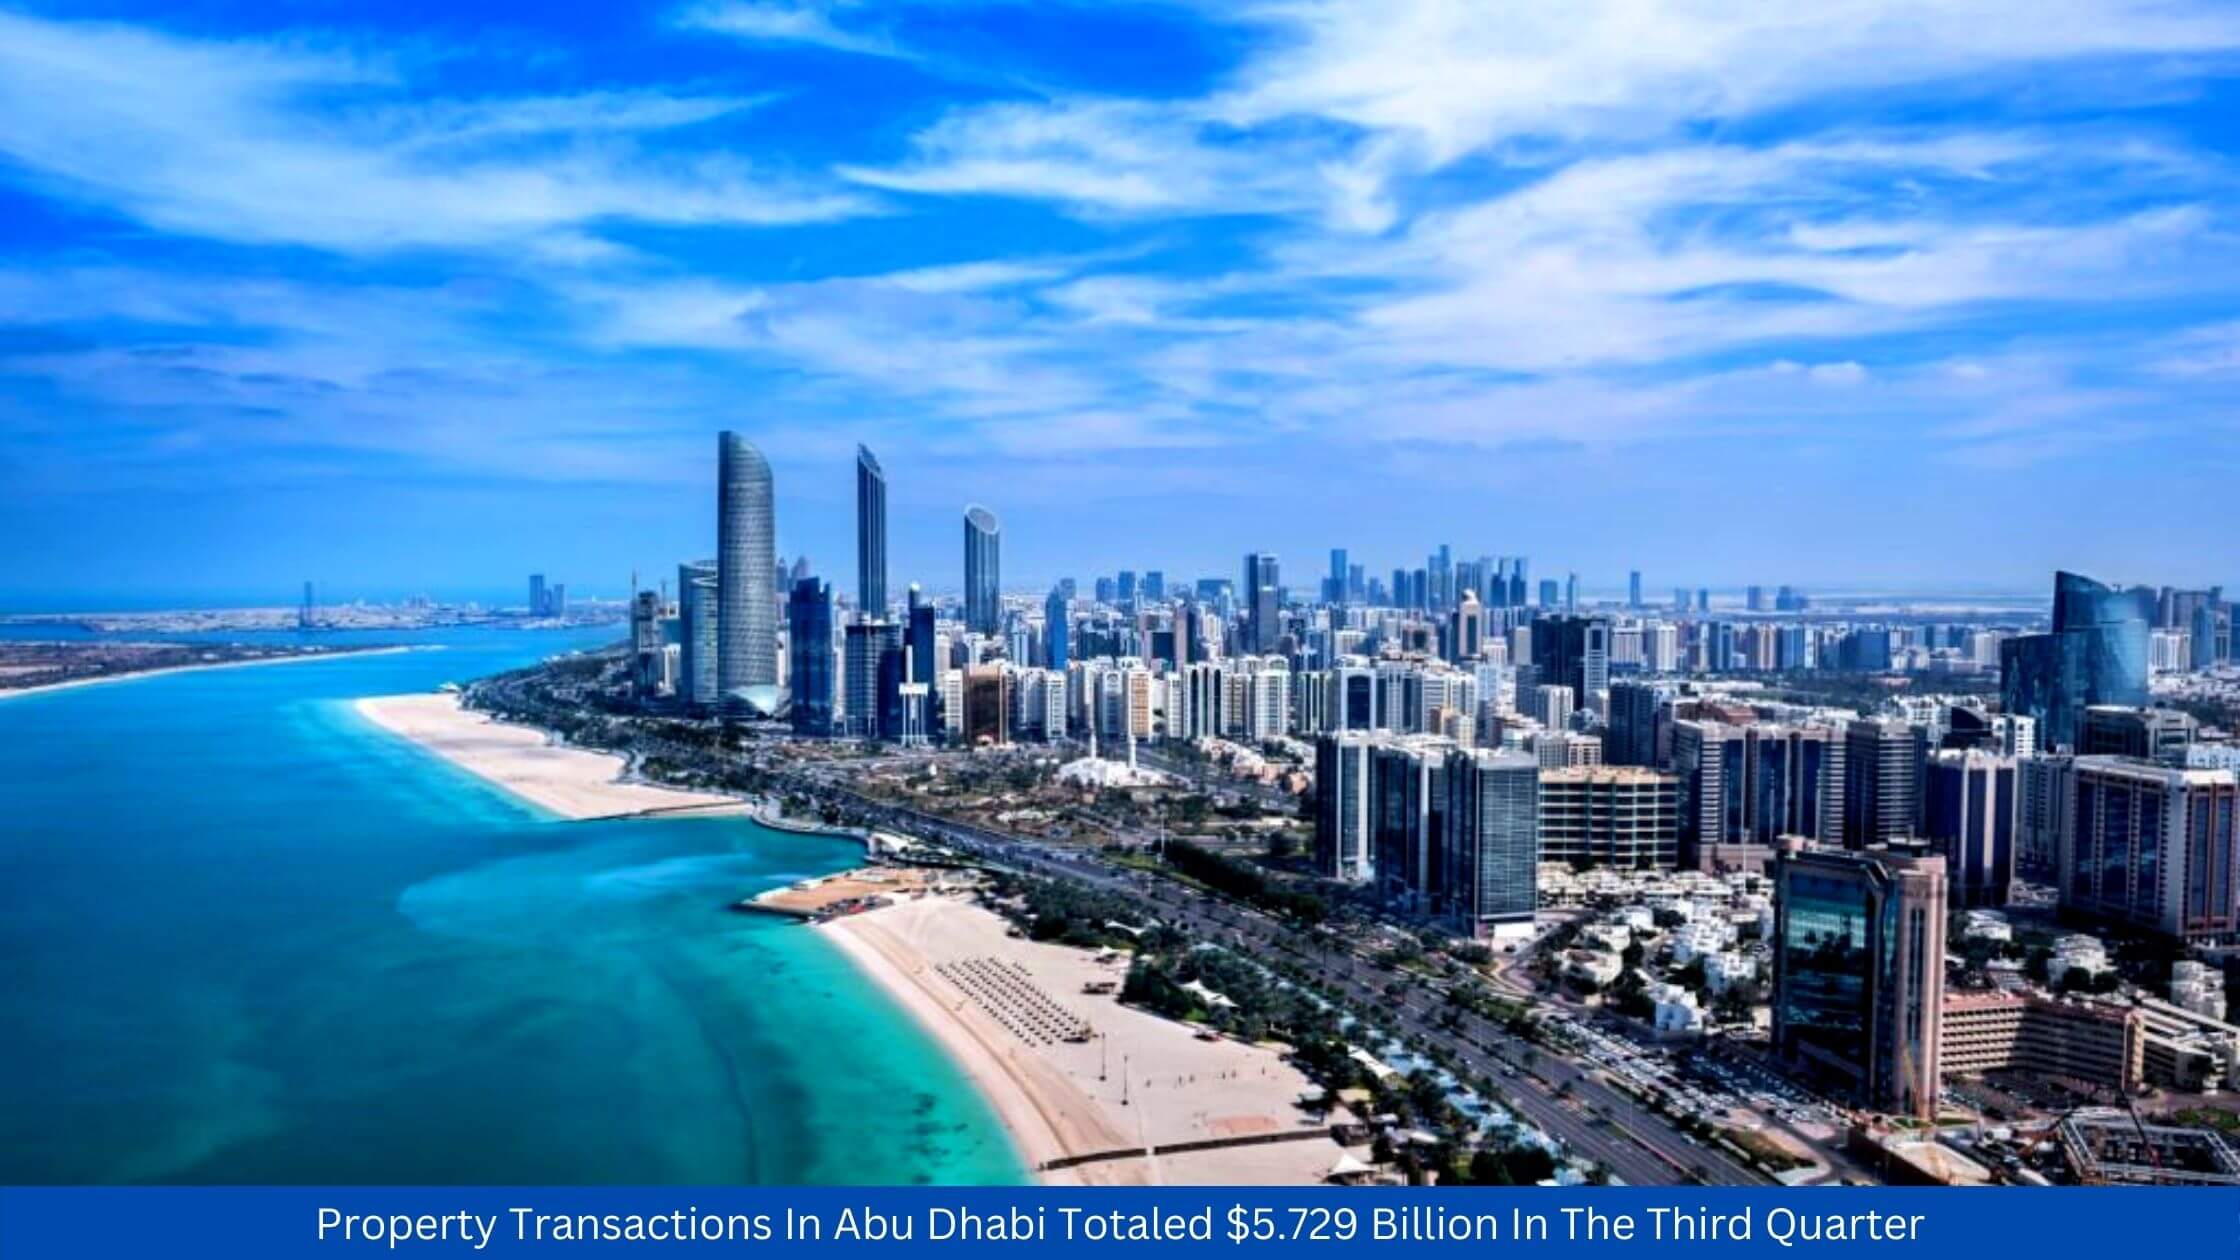 Property Transactions In Abu Dhabi Totaled $5.729 Billion In The Third Quarter